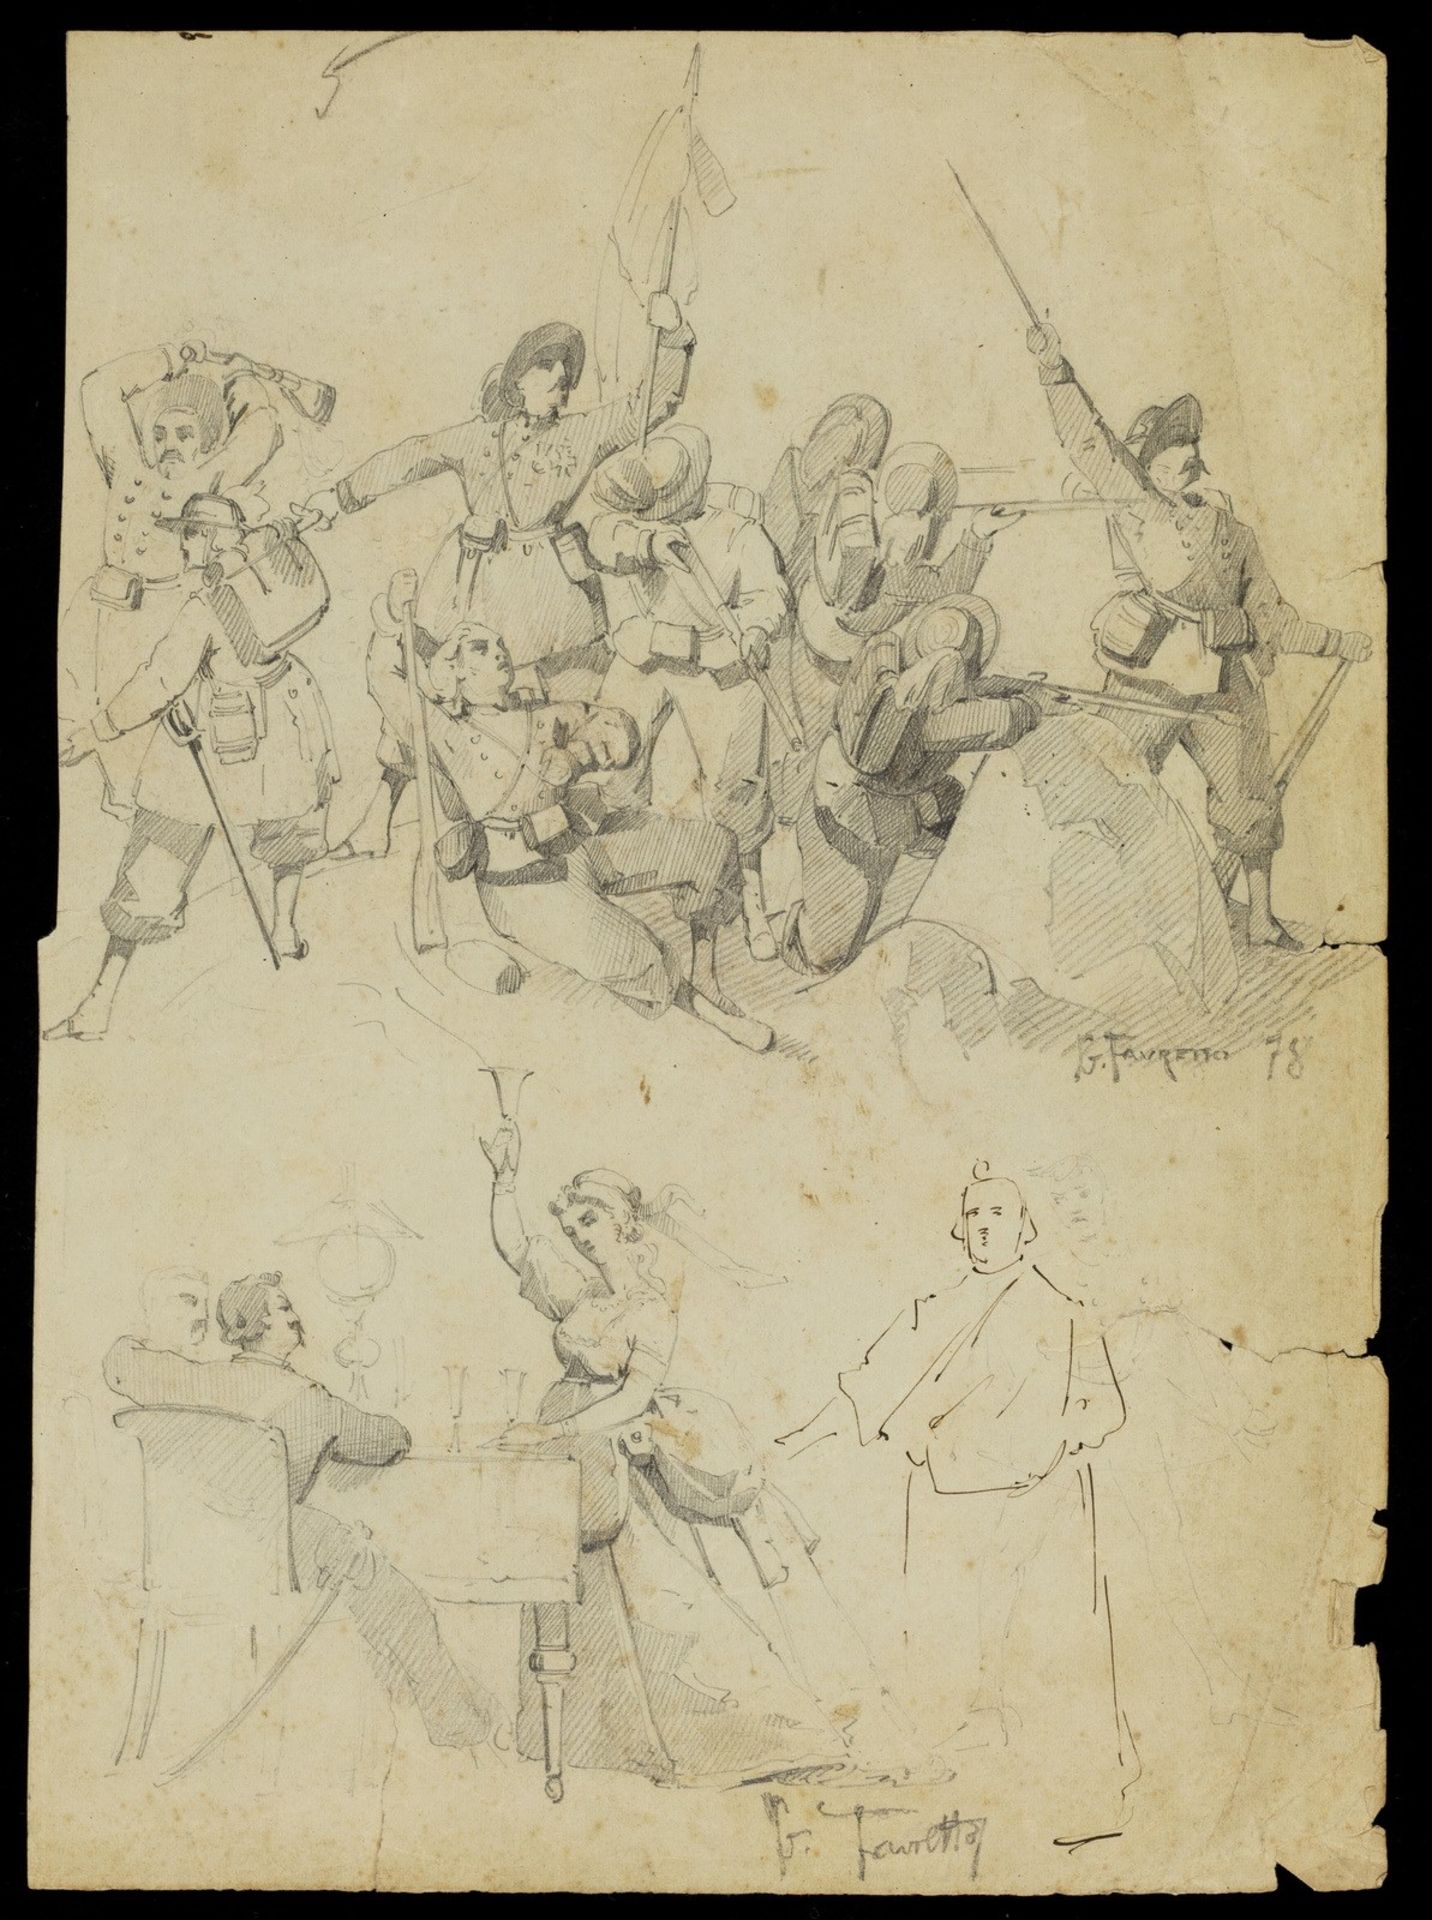 GIACOMO FAVRETTO Attributed to. Study of soldiers and figures around the table.